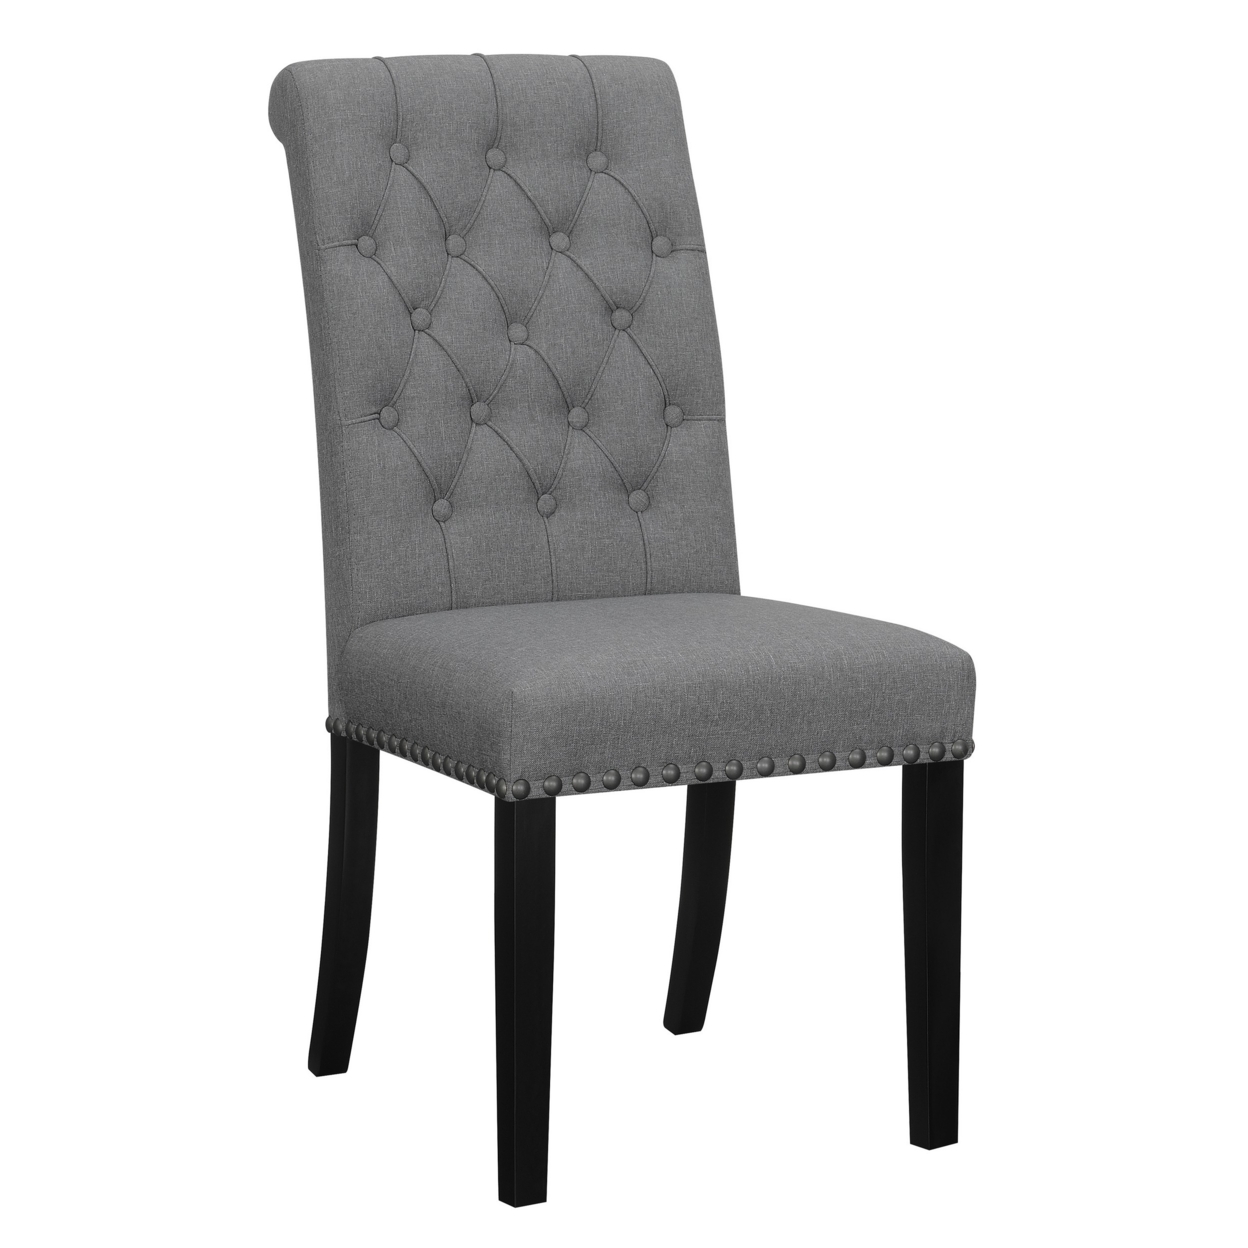 Ali 20 Inch Set Of 2 Side Chairs, Tall Rolled Tufted Back, Dark Gray, Brown- Saltoro Sherpi